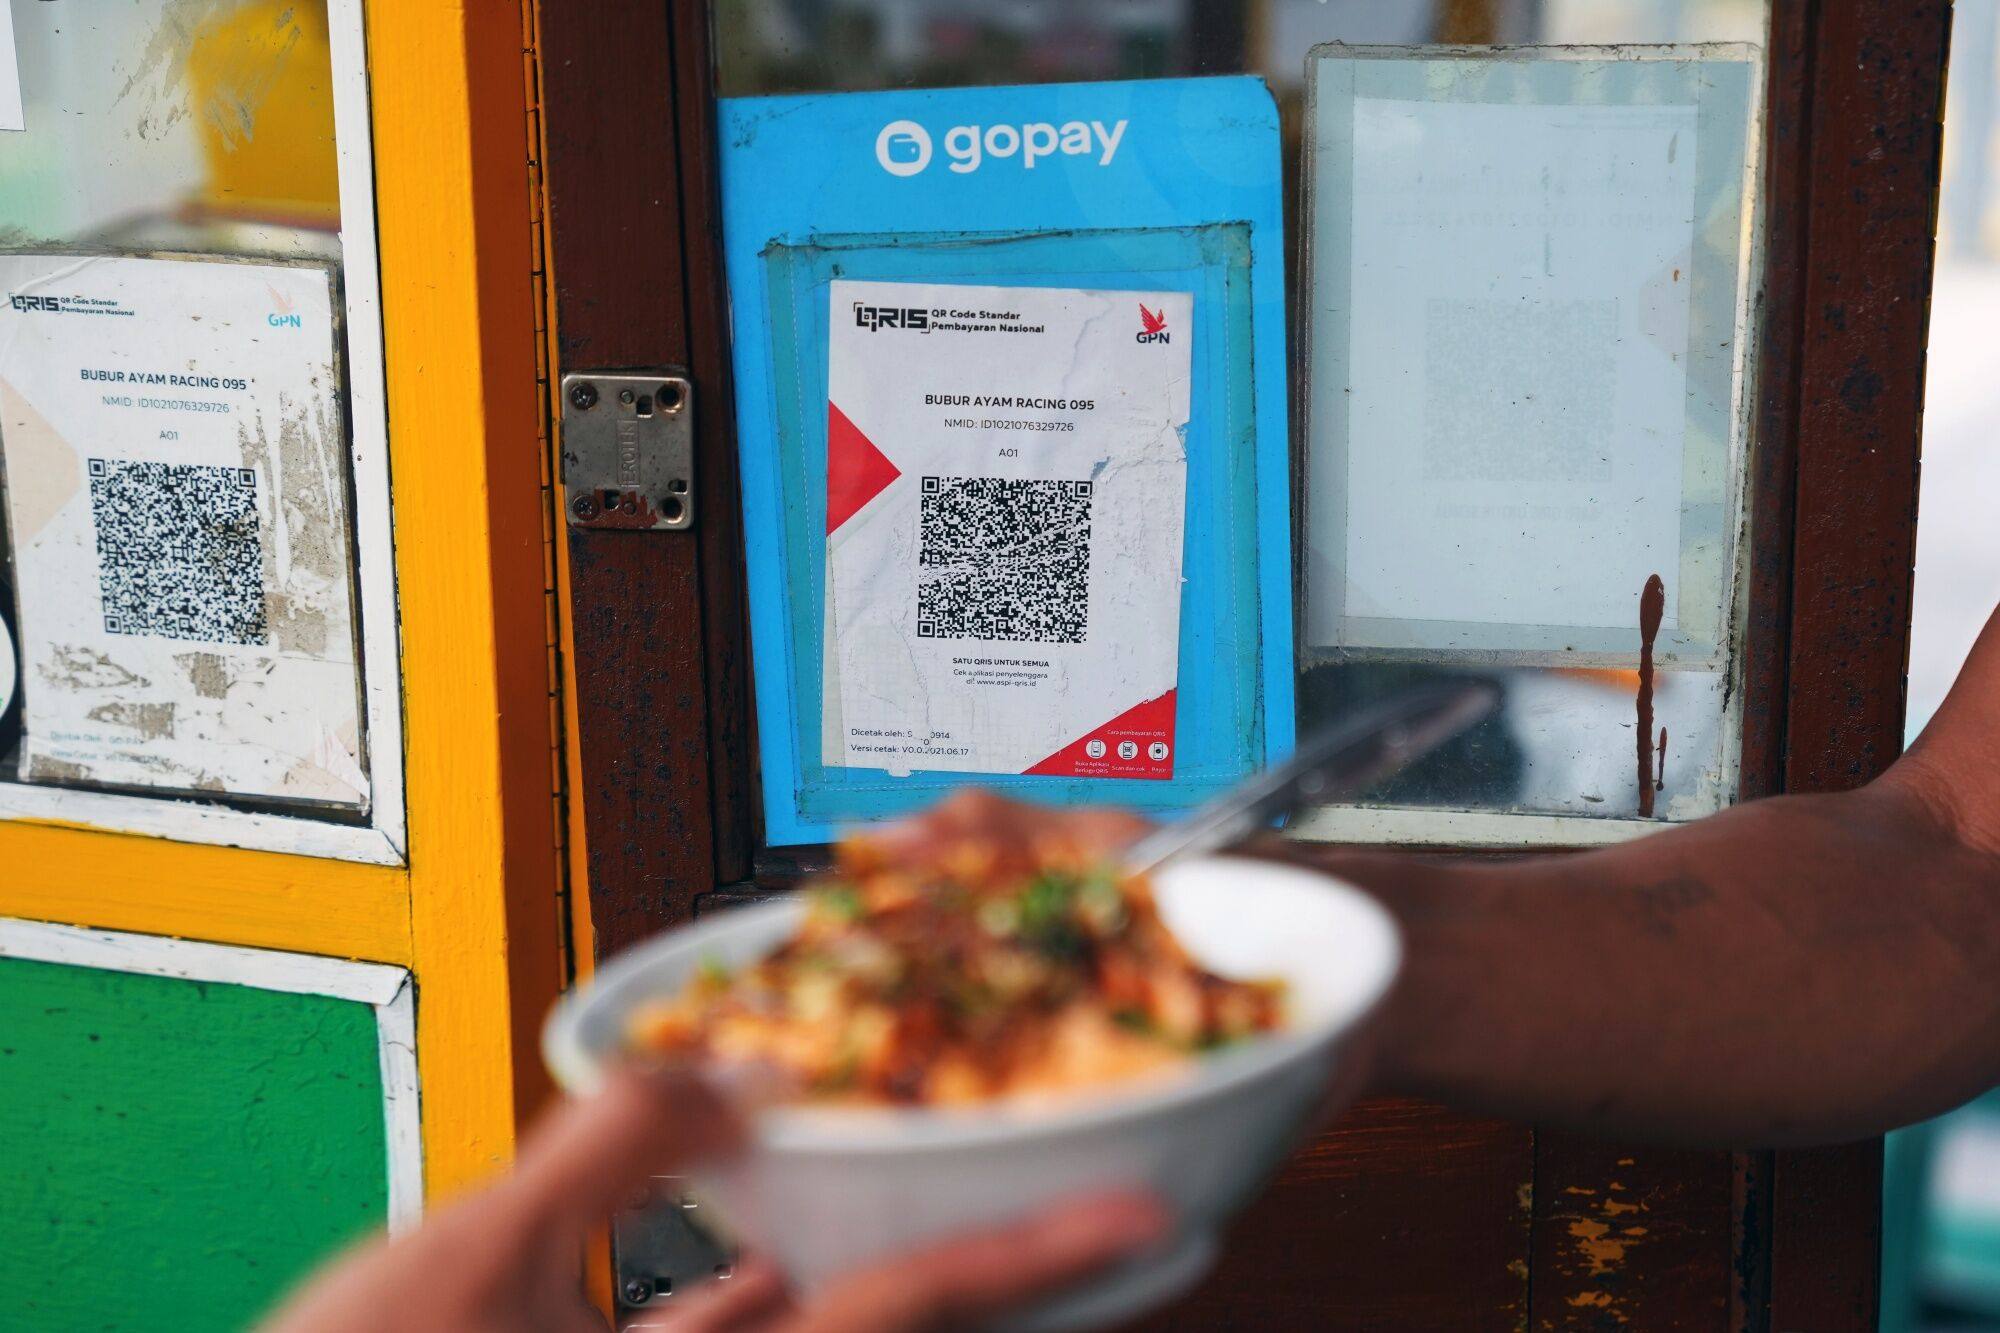 A QR code for mobile payment is displayed at a street food vendor in Jakarta on February 13. The uptake of QR codes and mobile payments is paving the way for Indonesia to capture billions of dollars of informal economic activity overlooked in taxation and even statistics amid small businesses’ reliance on cash. Photo: Bloomberg